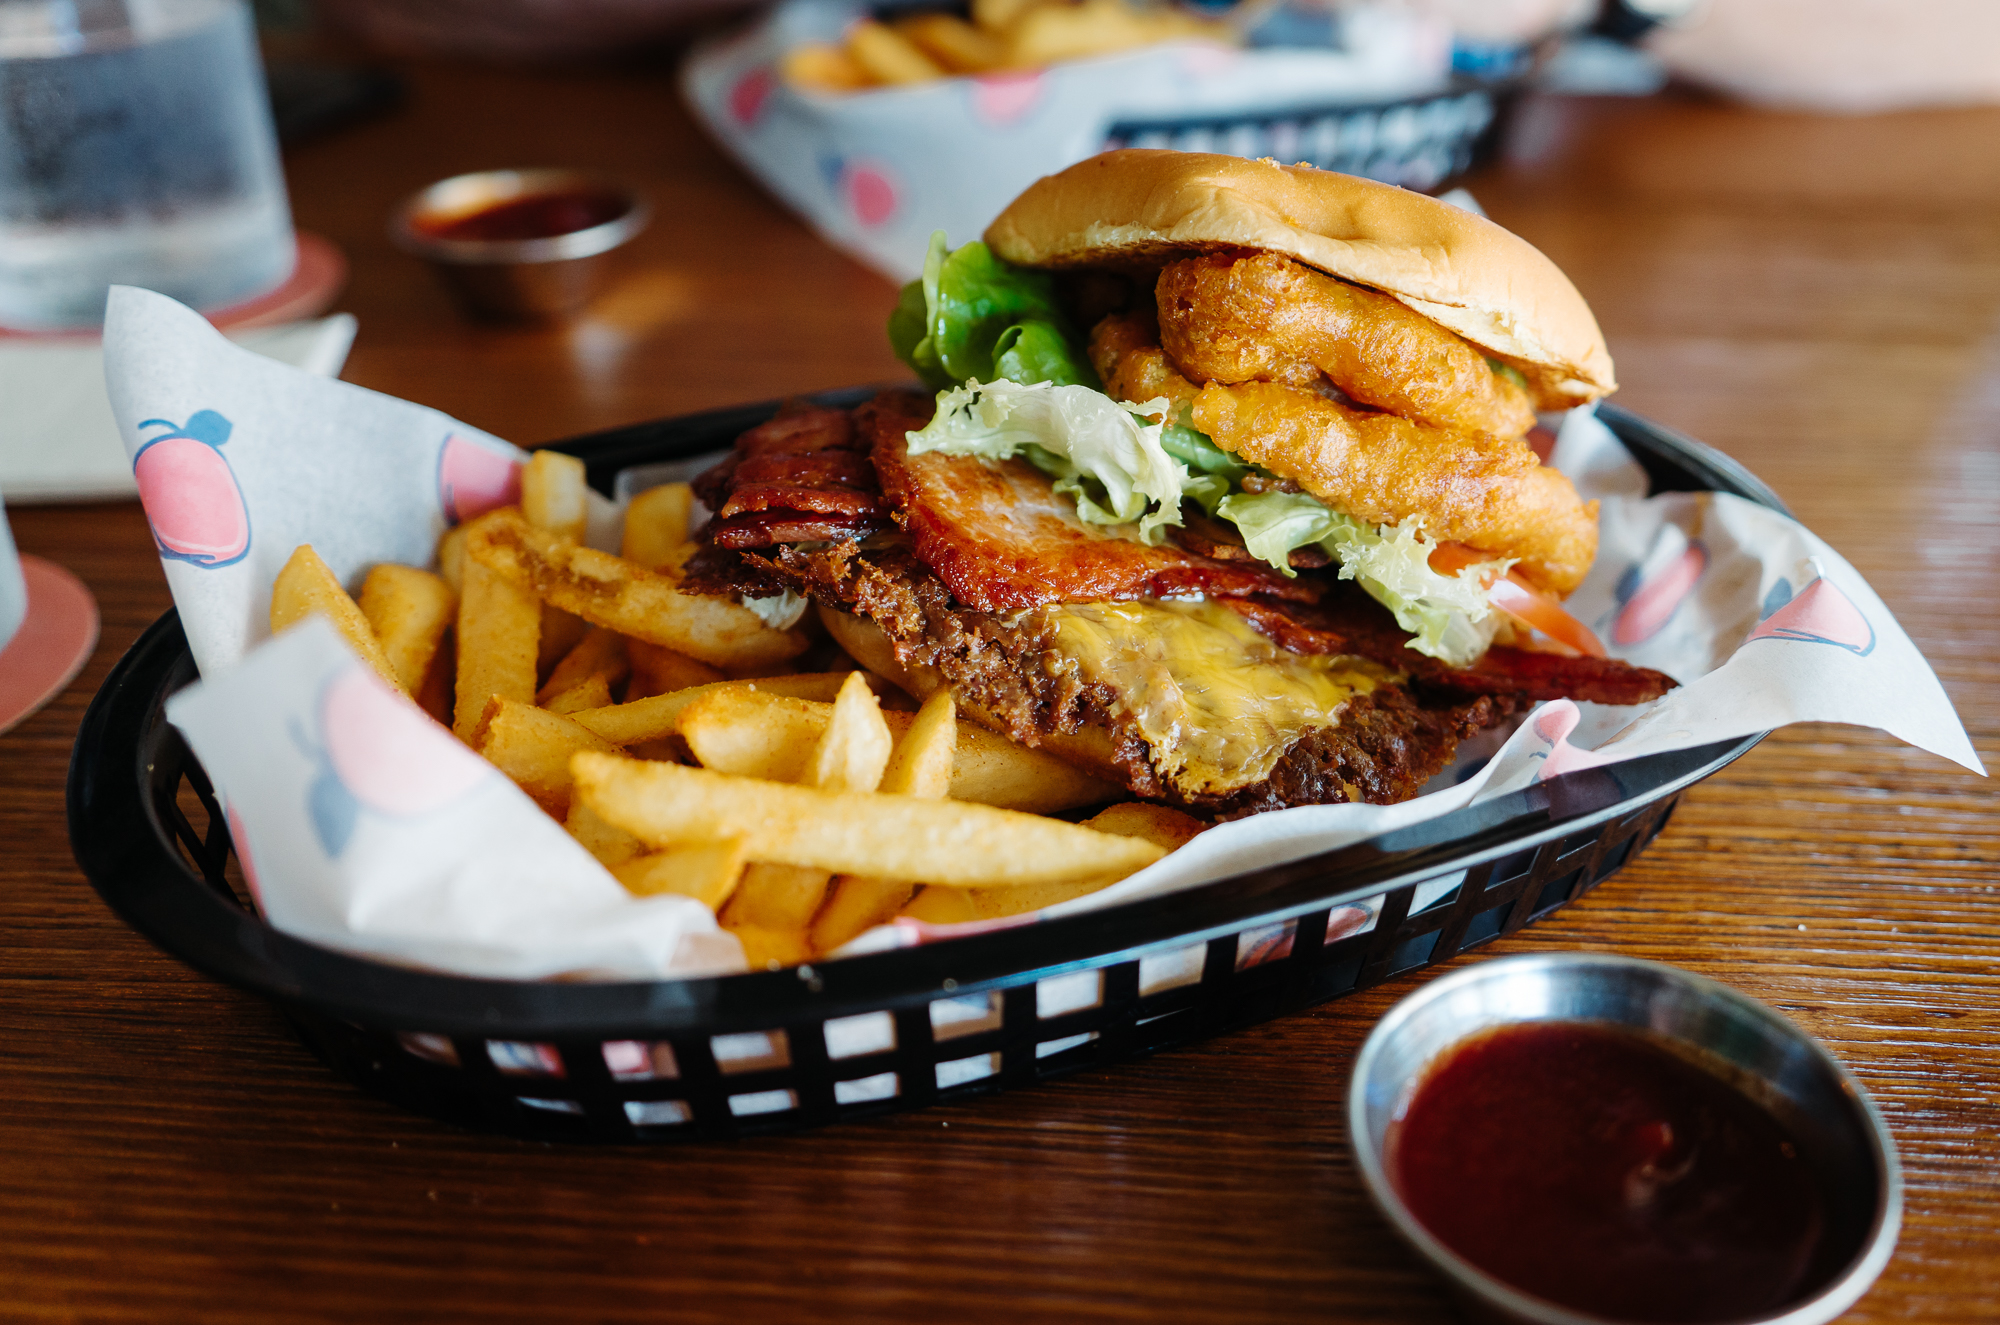 Here are our top picks for the best burgers in Perth